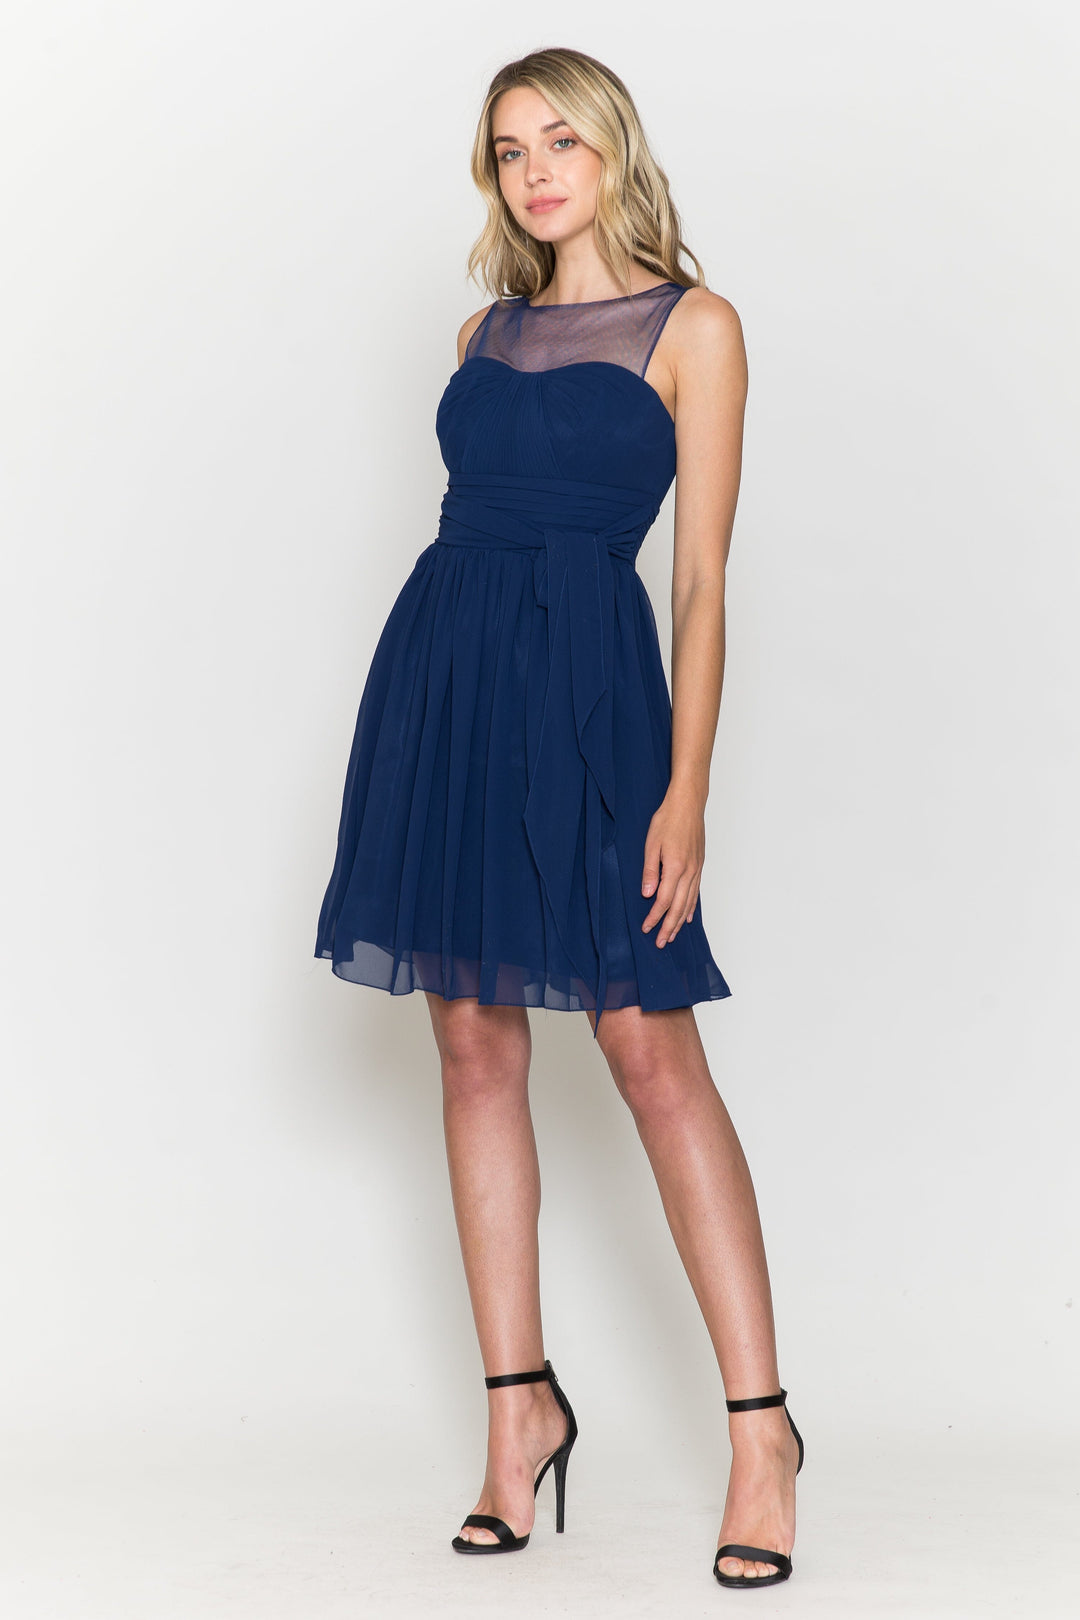 Short Sleeveless Illusion Dress with Bow by Poly USA 7006